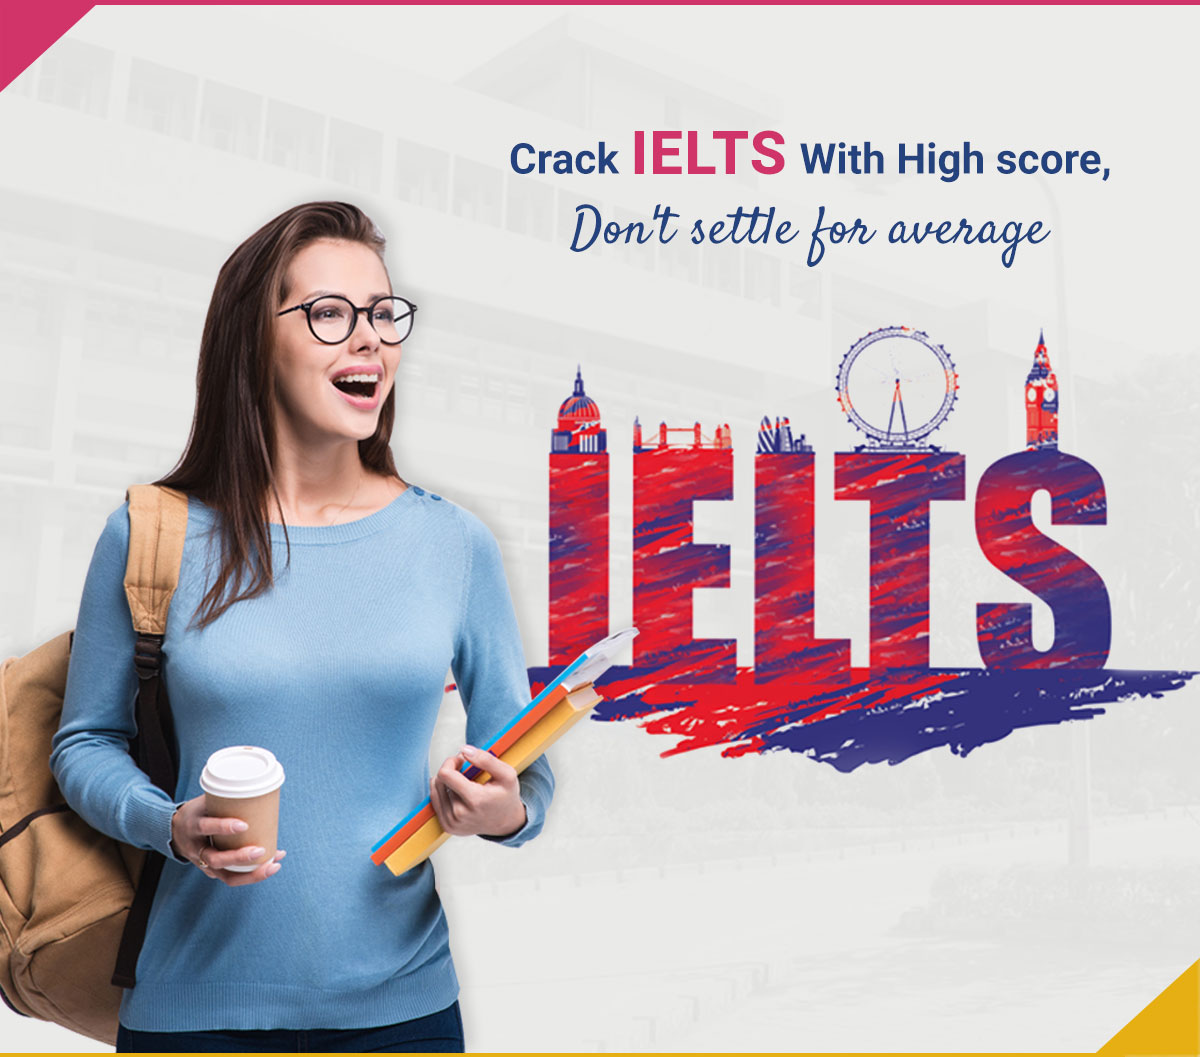 Practice with CTI’s experts to score high on your IELTS exam